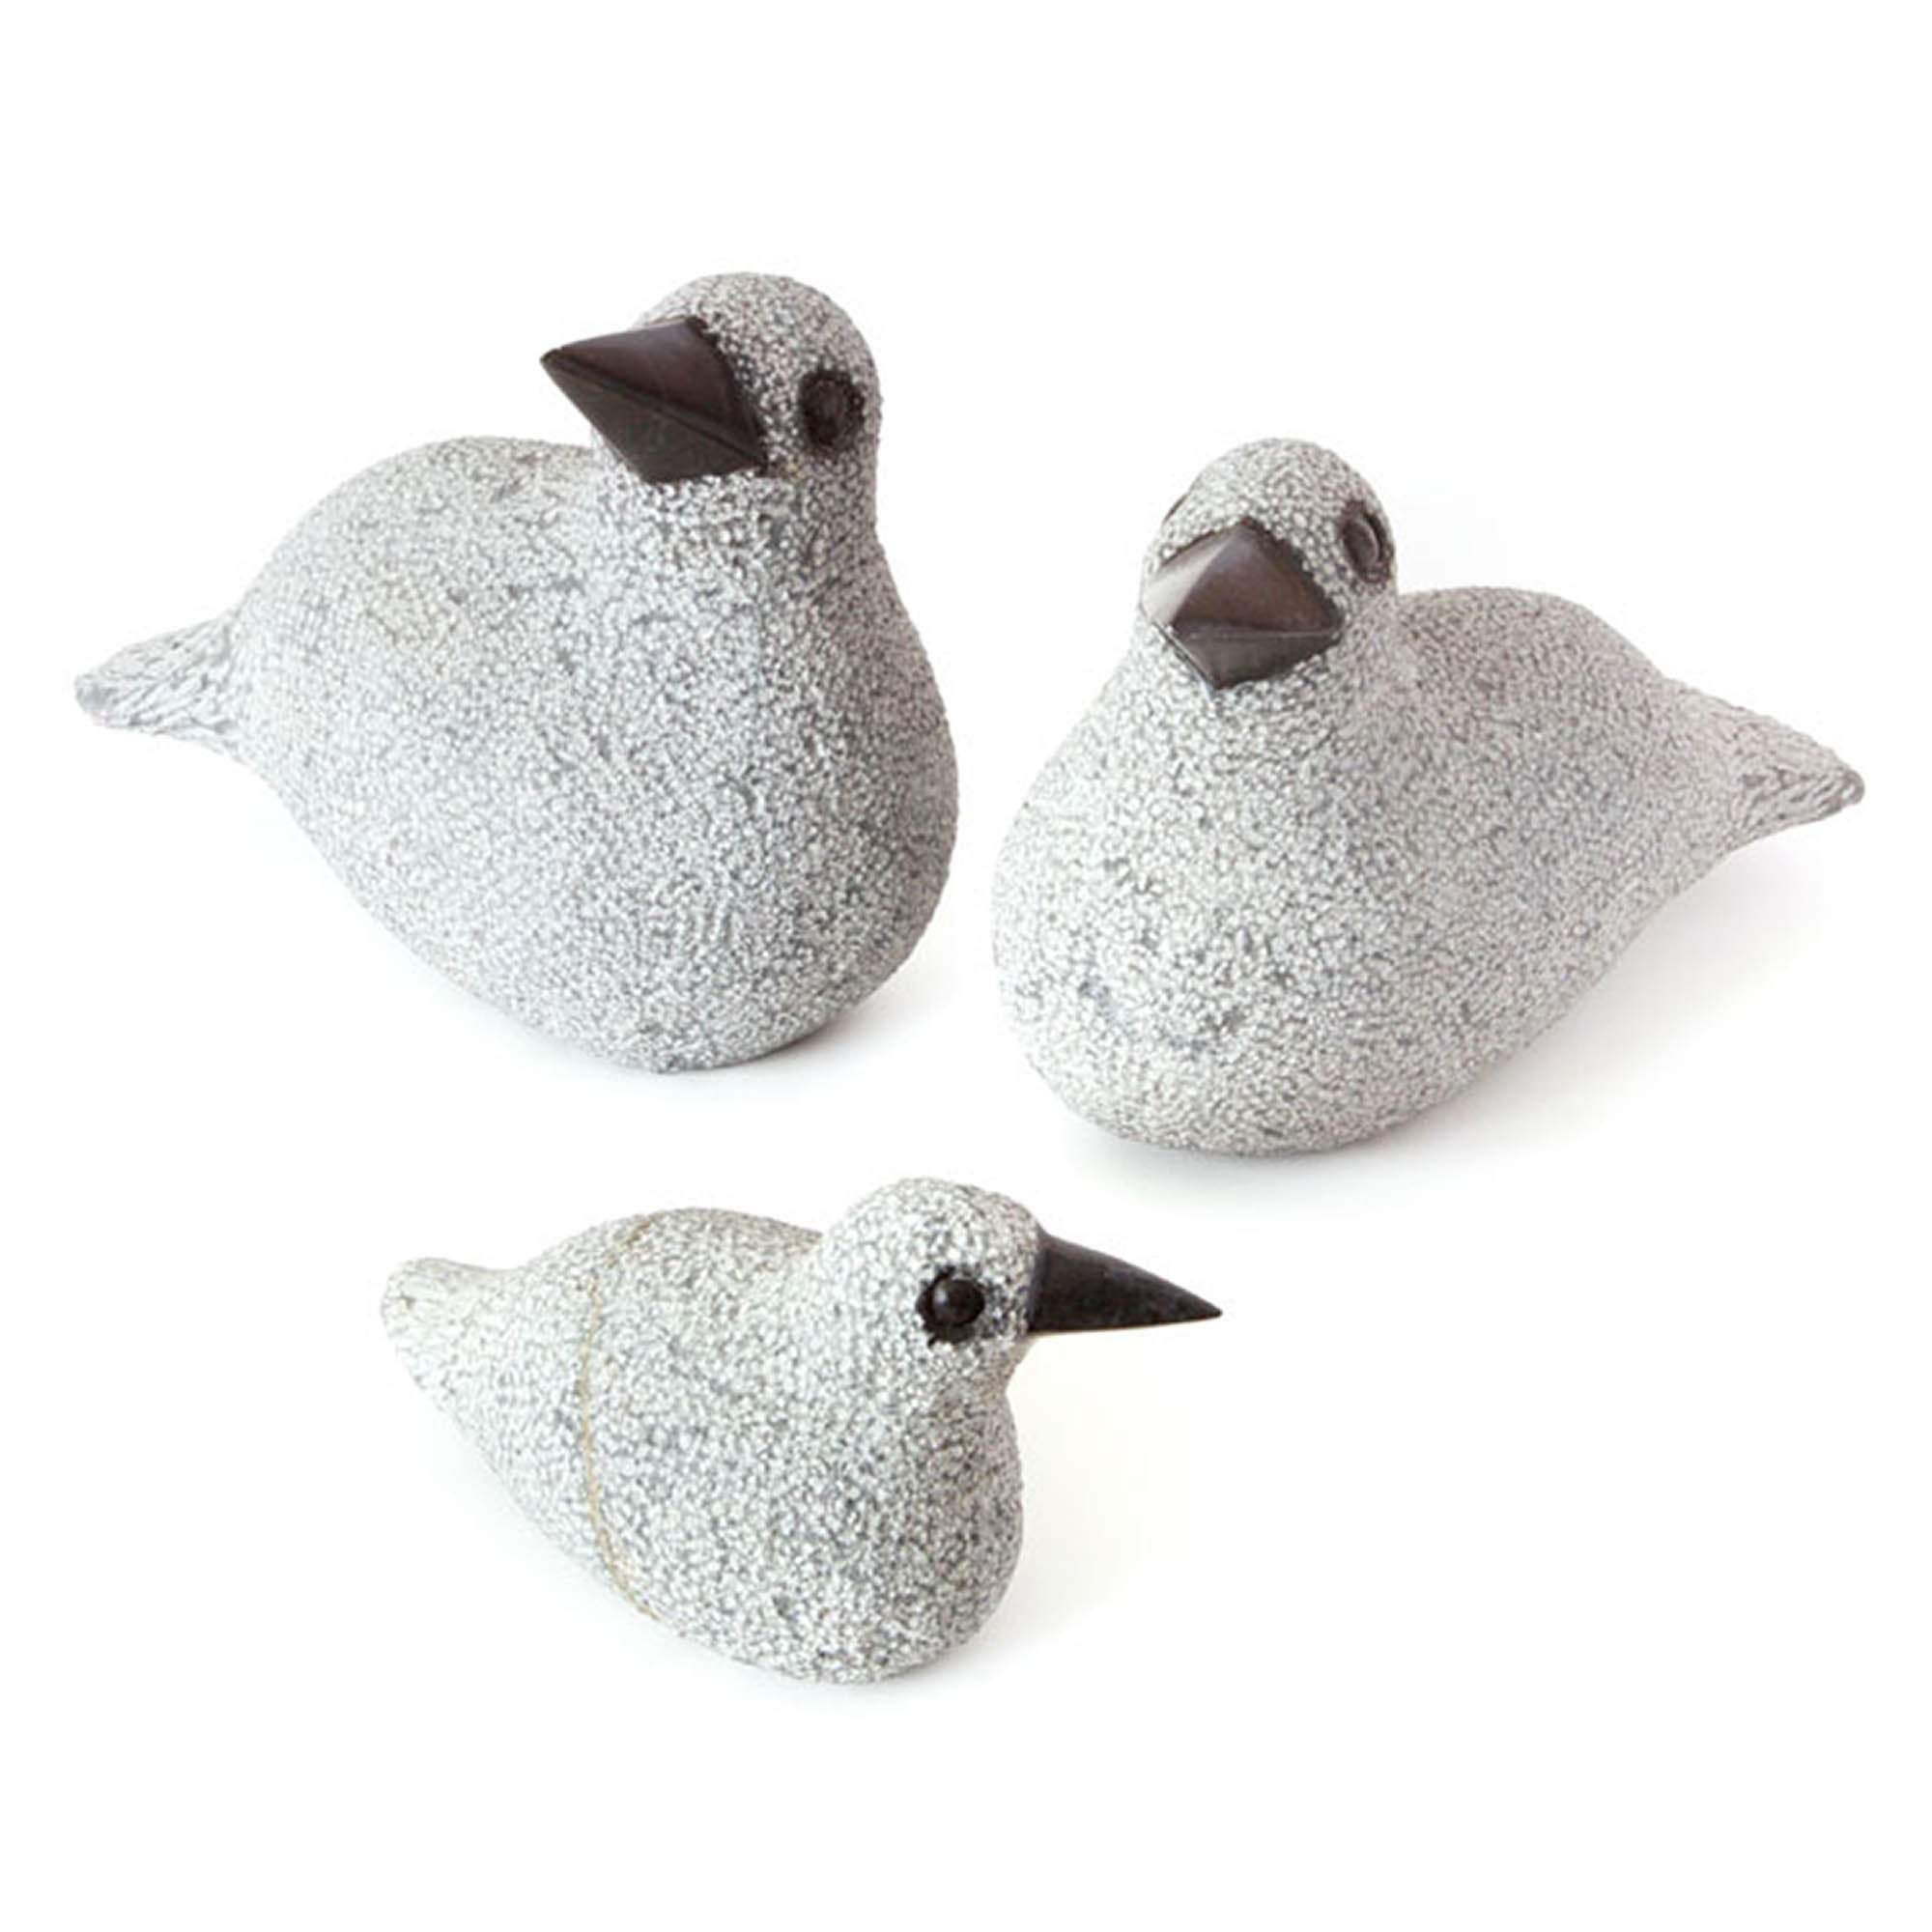 Hand-Carved Stone Duck Sculpture - S